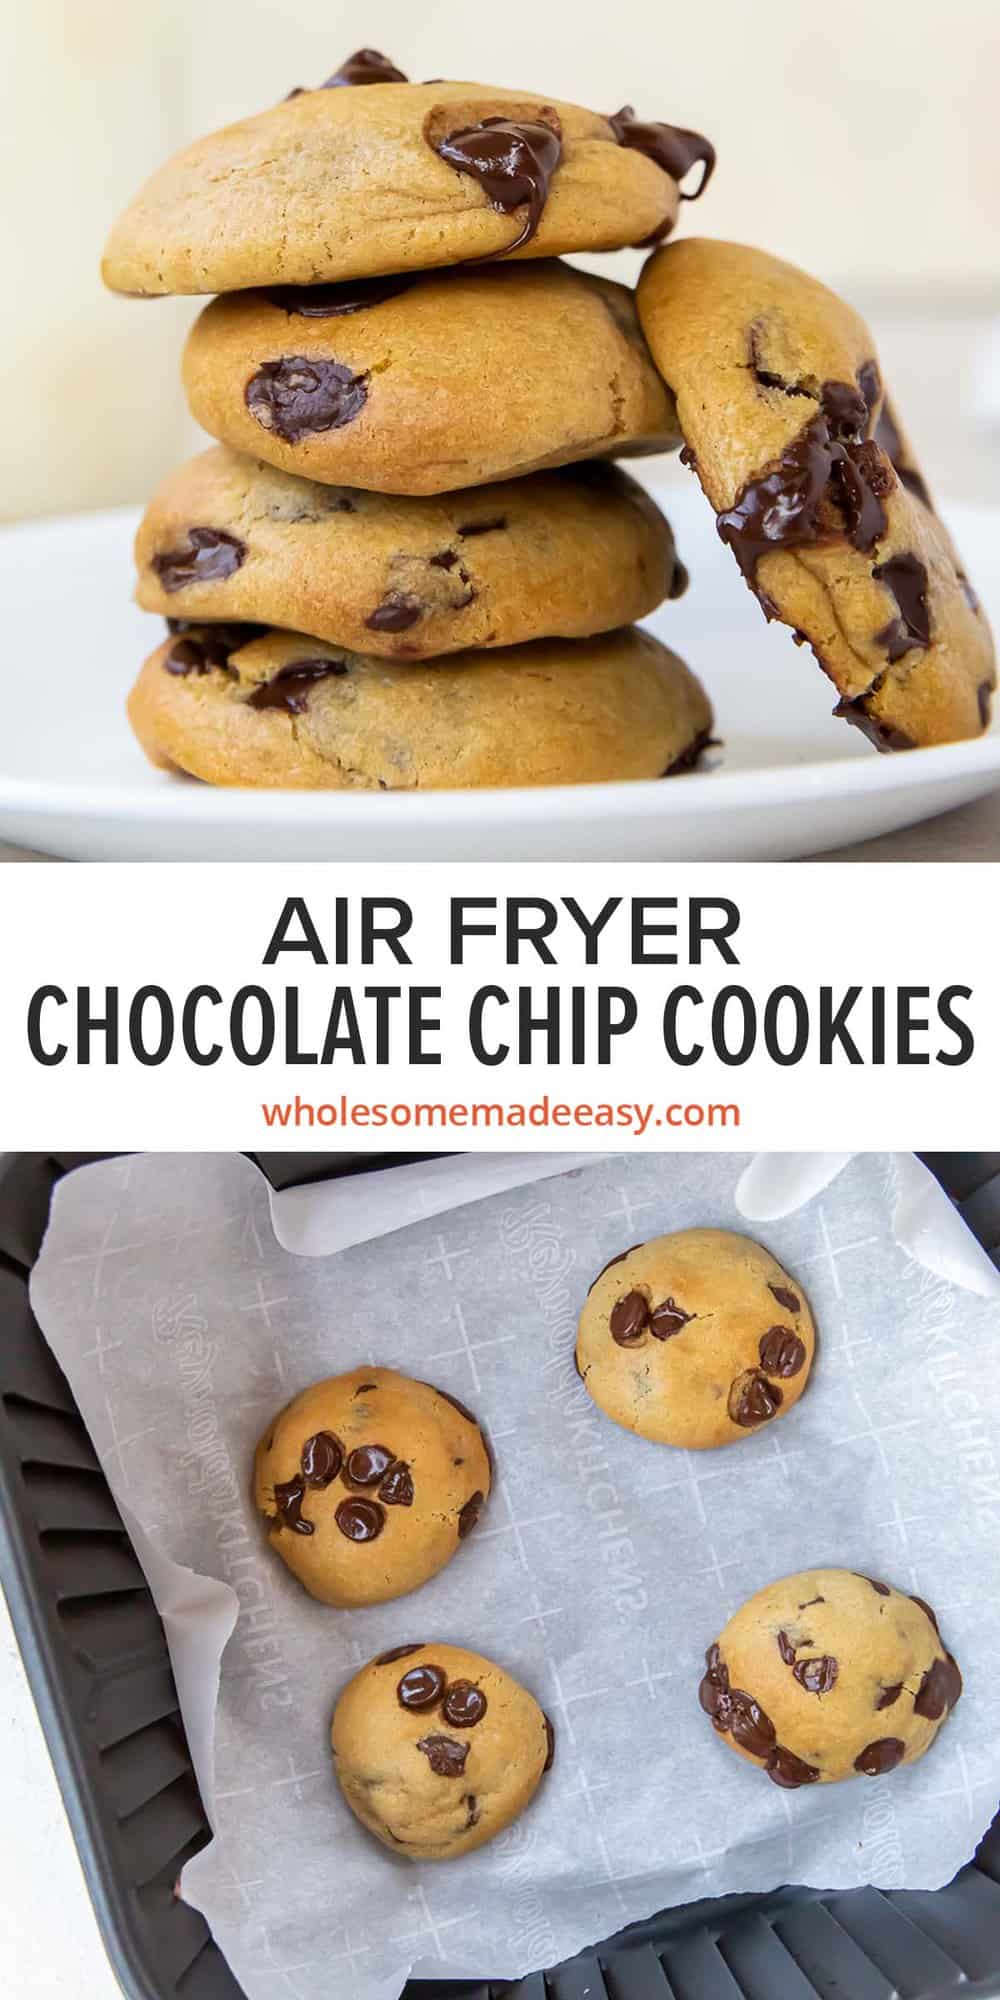 Chocolate chip cookies on a white plate and in an air fryer basket with text.